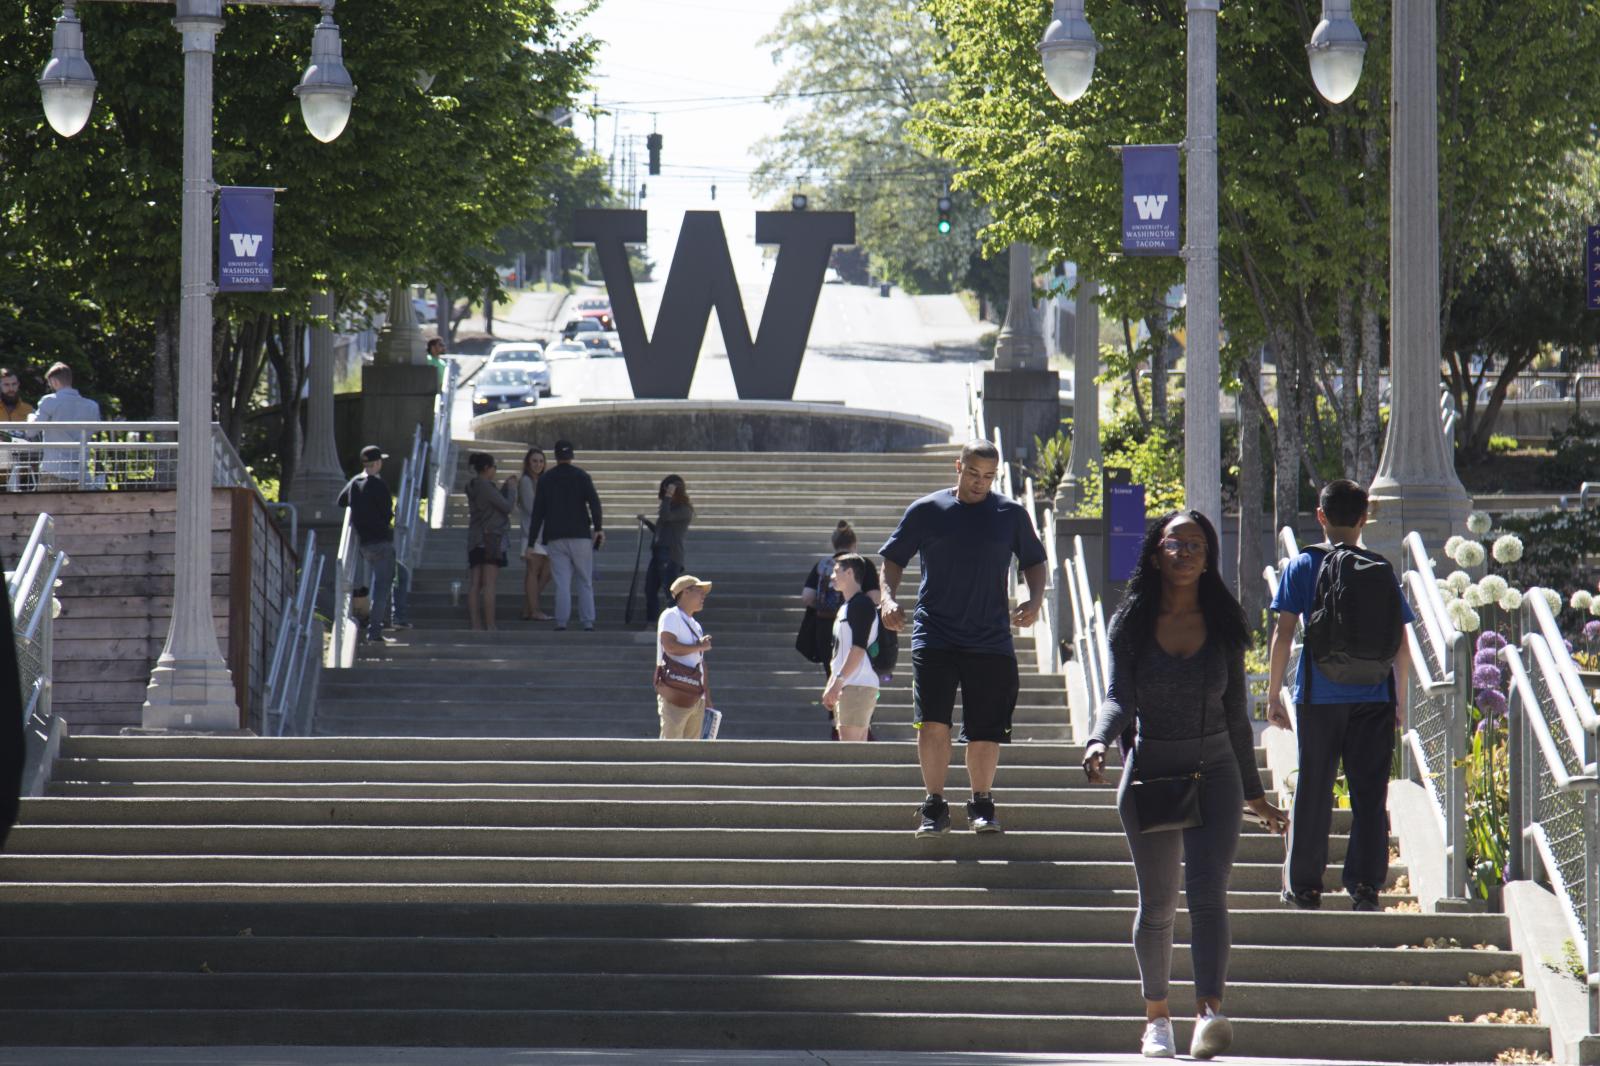 The UW Tacoma campus stairs, showing "W" sculpture with students walking in front. 